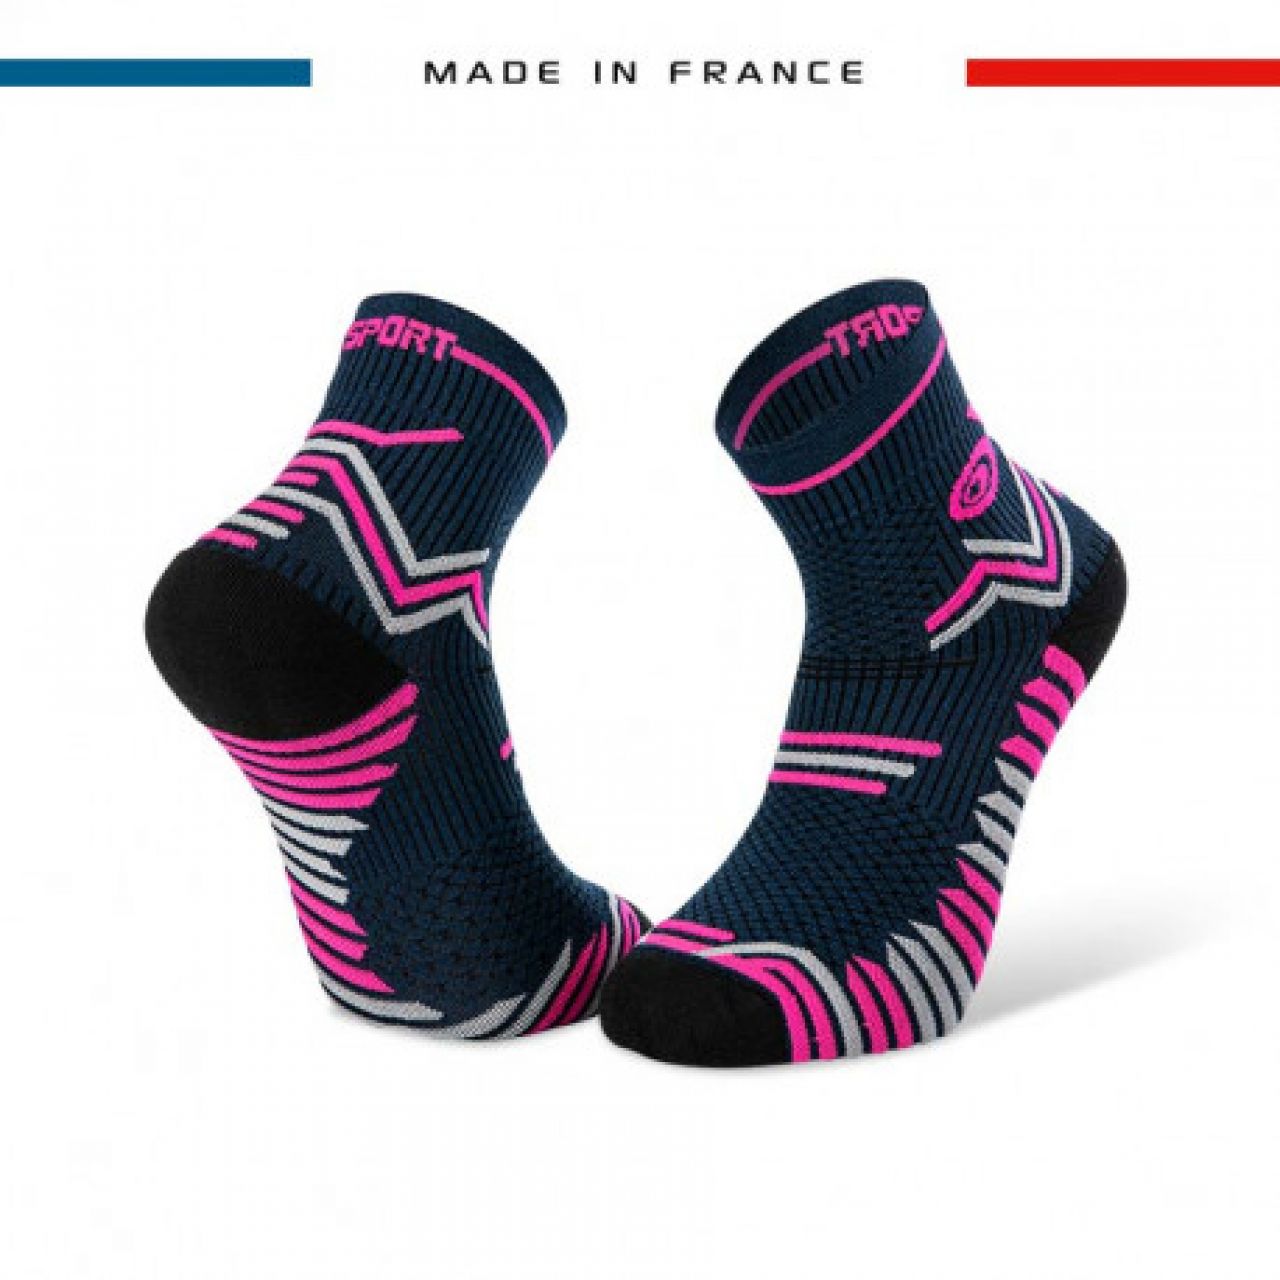 BV SPORT CHAUSSETTES ULTRA TRAIL BLLEUES ET ROSE Made in France